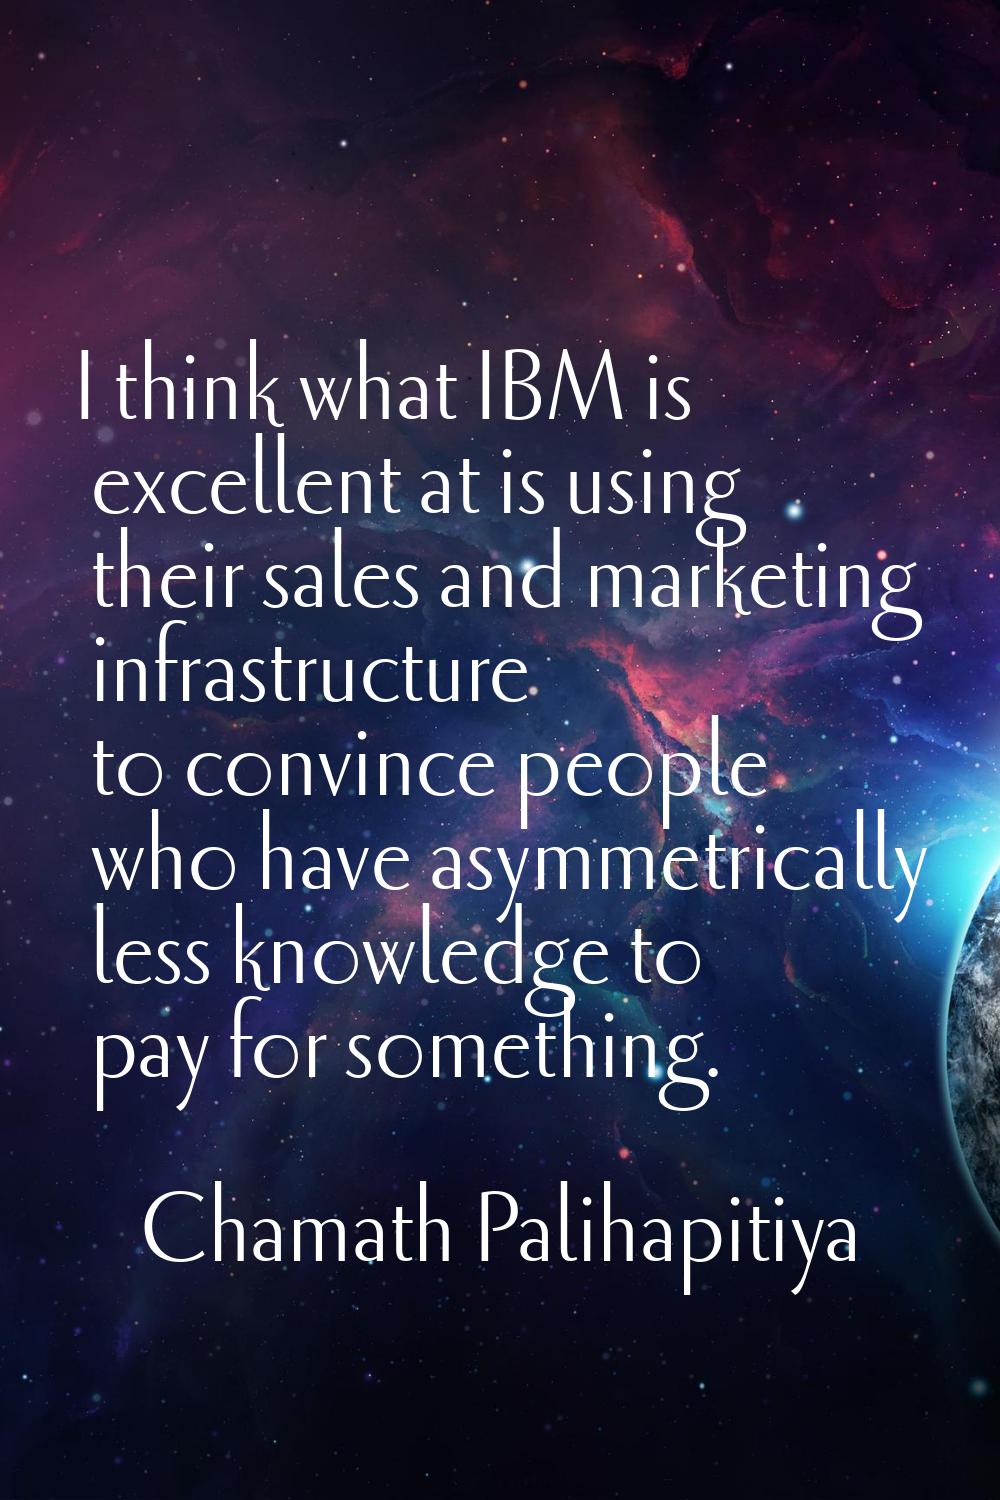 I think what IBM is excellent at is using their sales and marketing infrastructure to convince peop